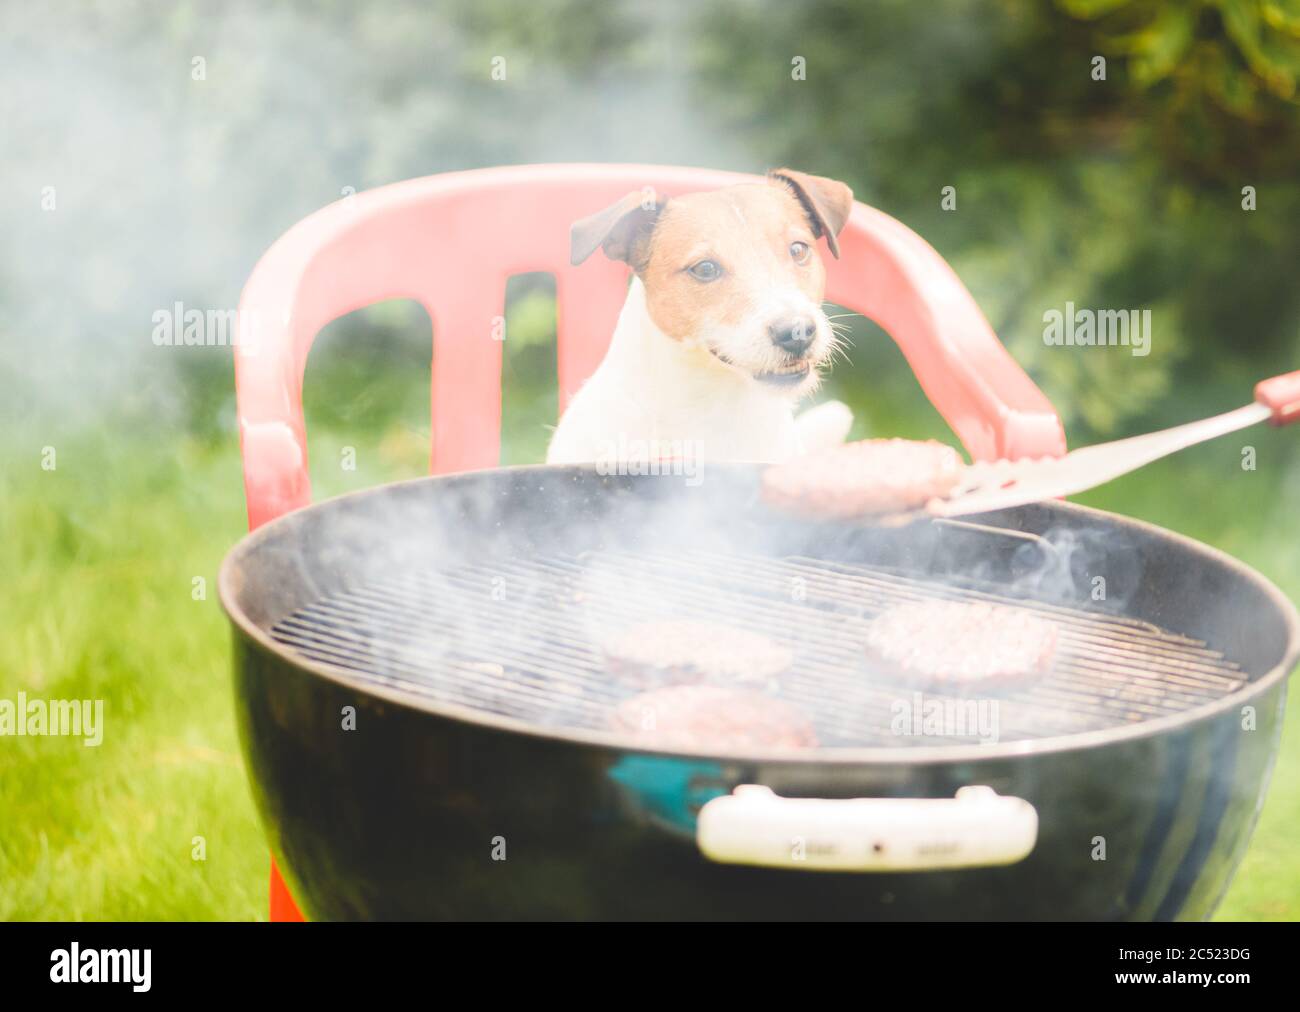 Funny dog looking at burger cooked on grill during family party at backyard lawn on summer day Stock Photo